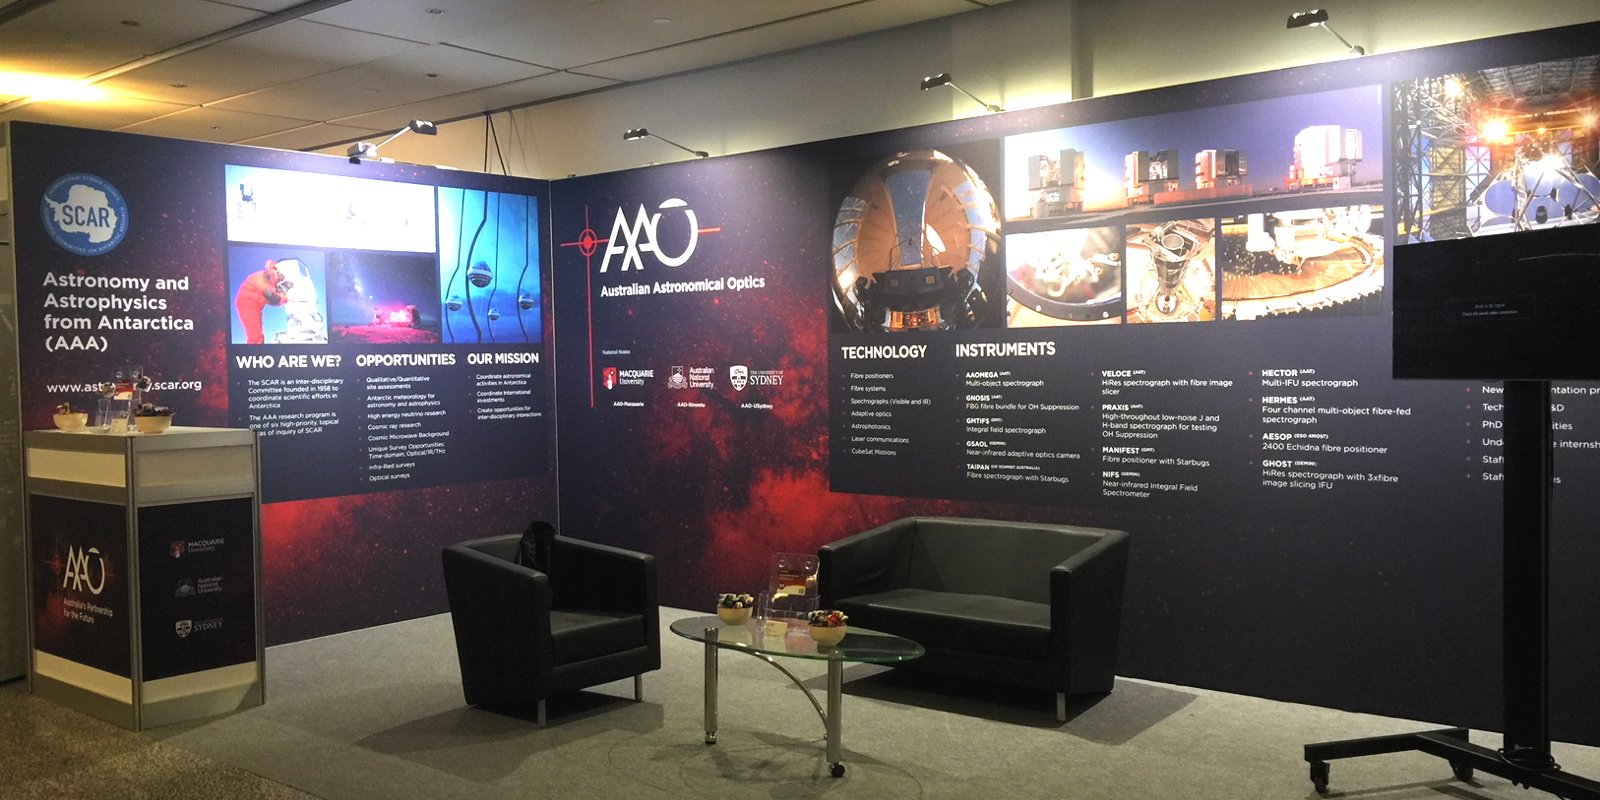 Frugtgrøntsager Åre Atlas 🄼🄰🅃🅃🄷🄴🅆 🄲🄾🄻🄻🄴🅂🅂 on Twitter: "Folks, come and visit the stand  for the new AAO (Australian Astronomical Optics) at the IAU General  Assembly - it's right next to the coffee stand and there